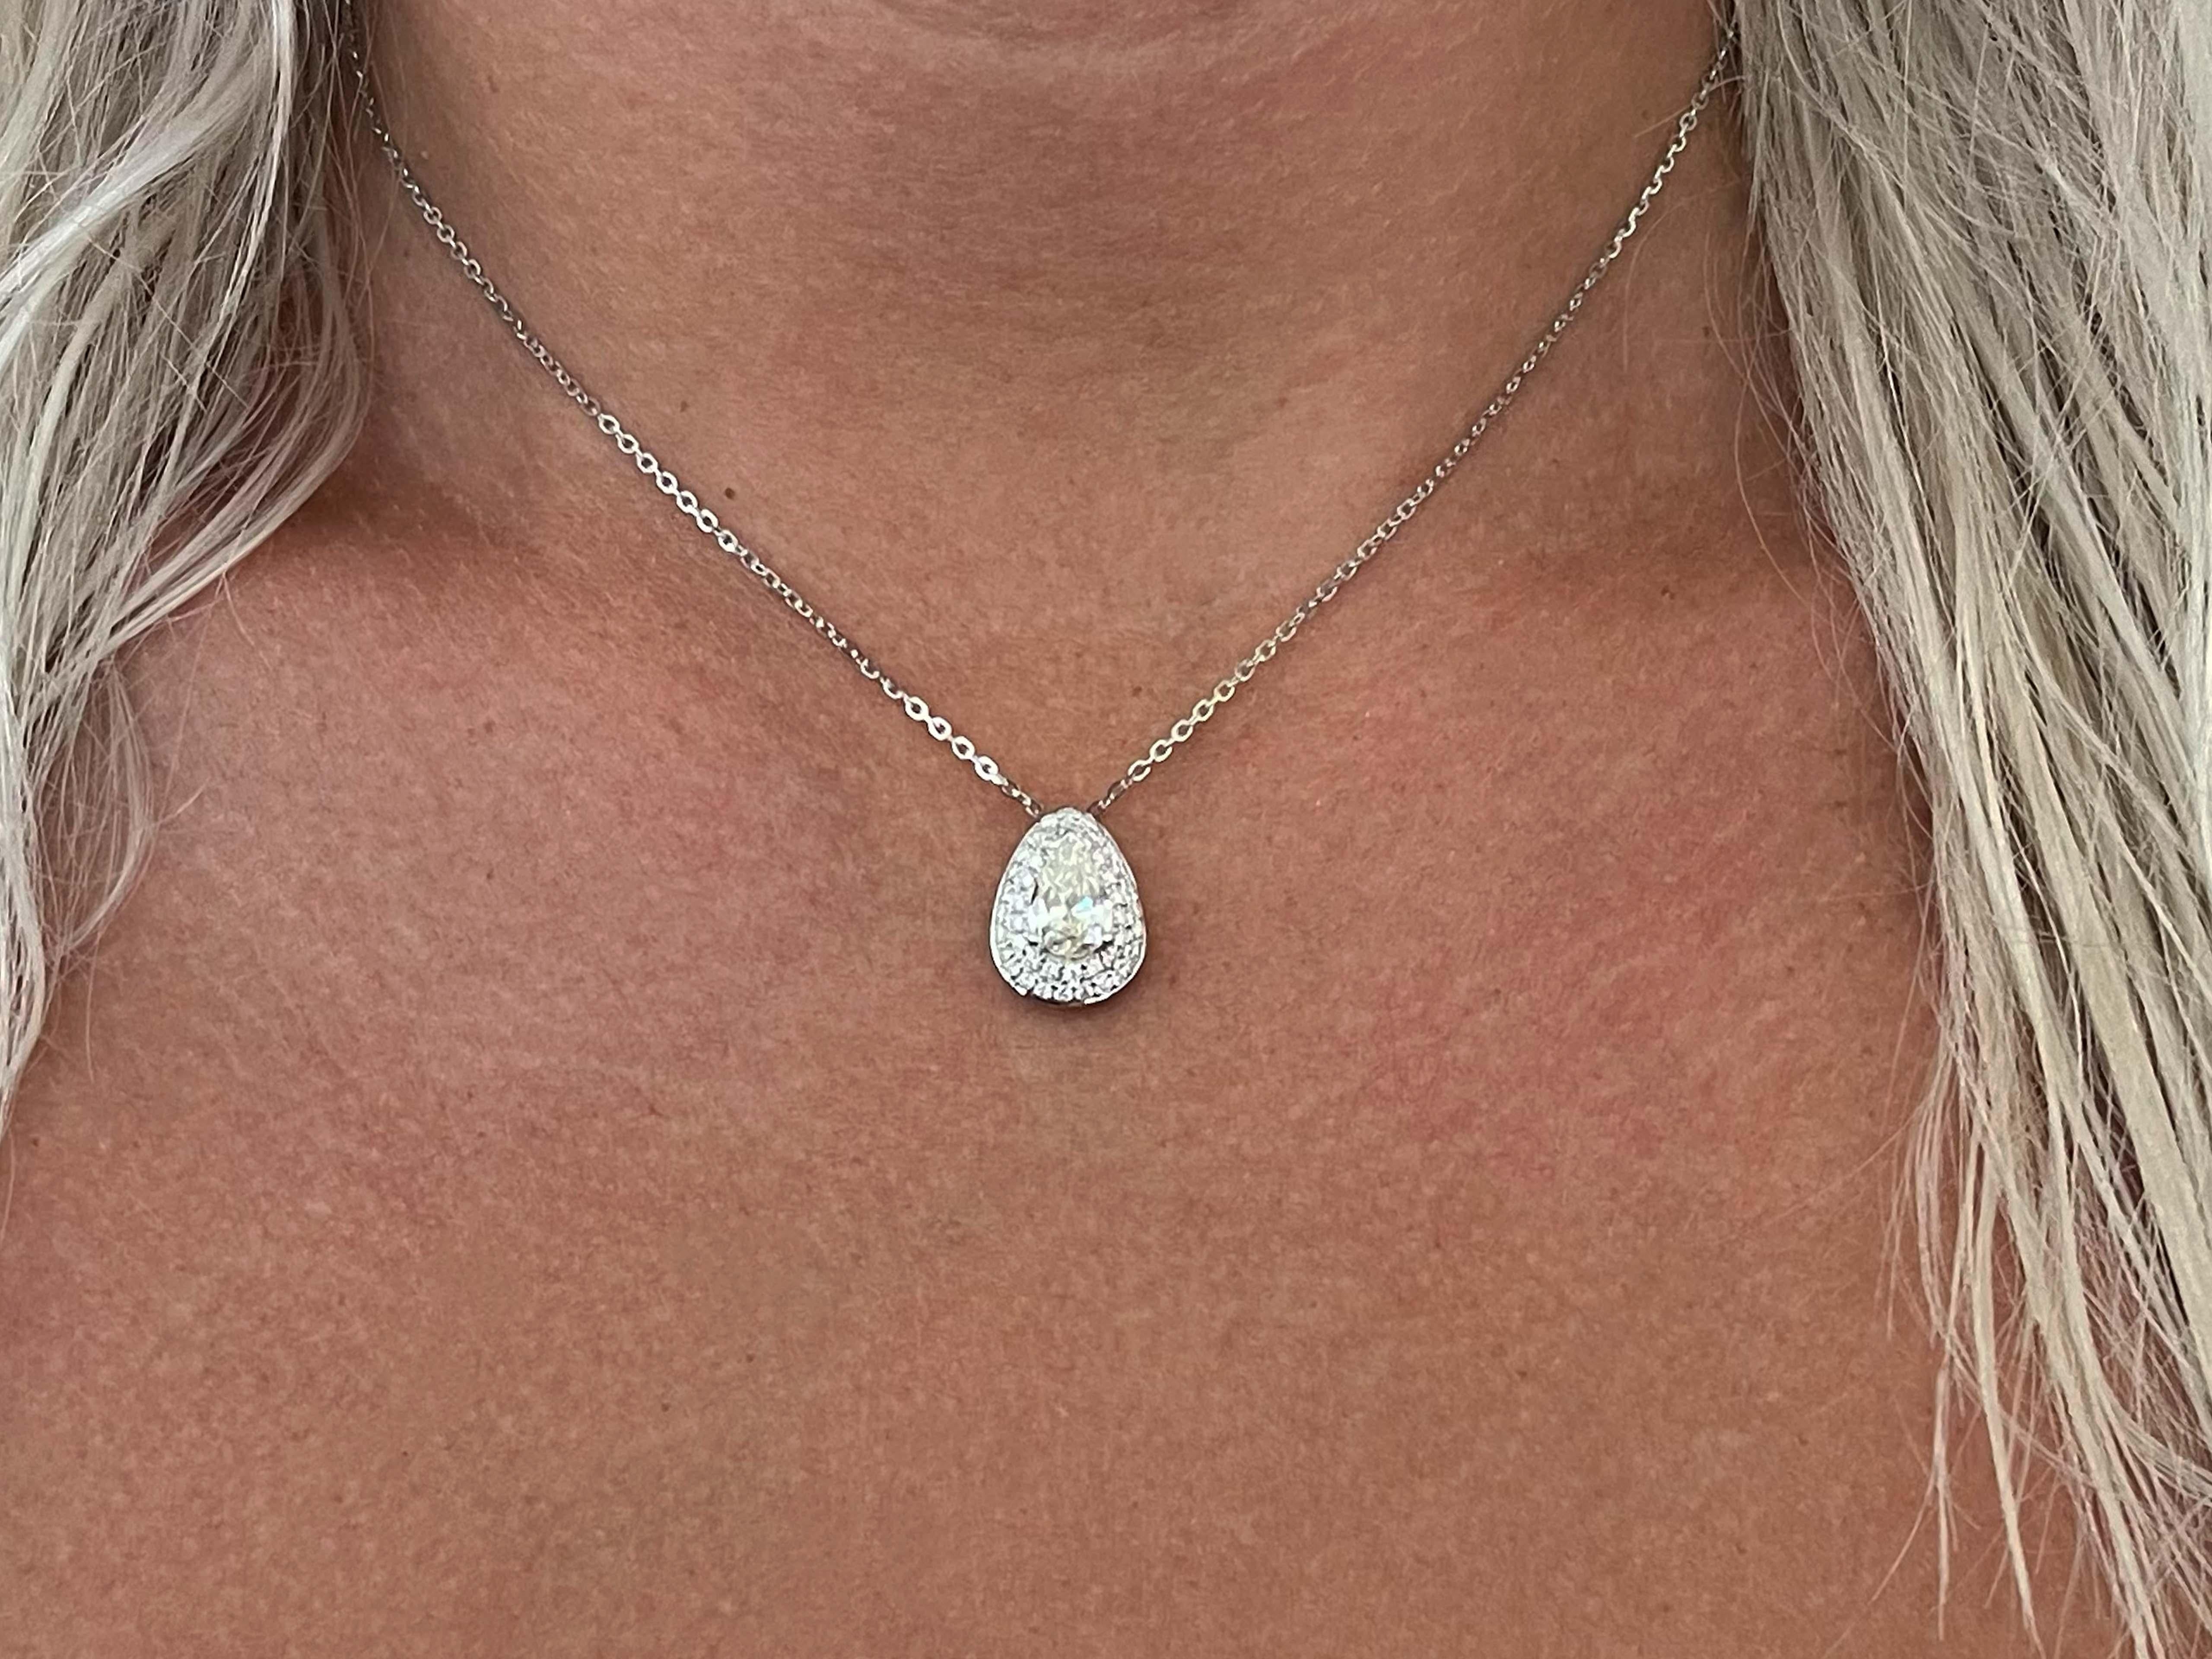 This pendant features a 1.02 ct pear shaped diamond and is surrounded by a gorgeous double halo of 43 round brilliant cut diamonds totaling 0.44ct. The pendant is in 18k white gold and comes on a 16